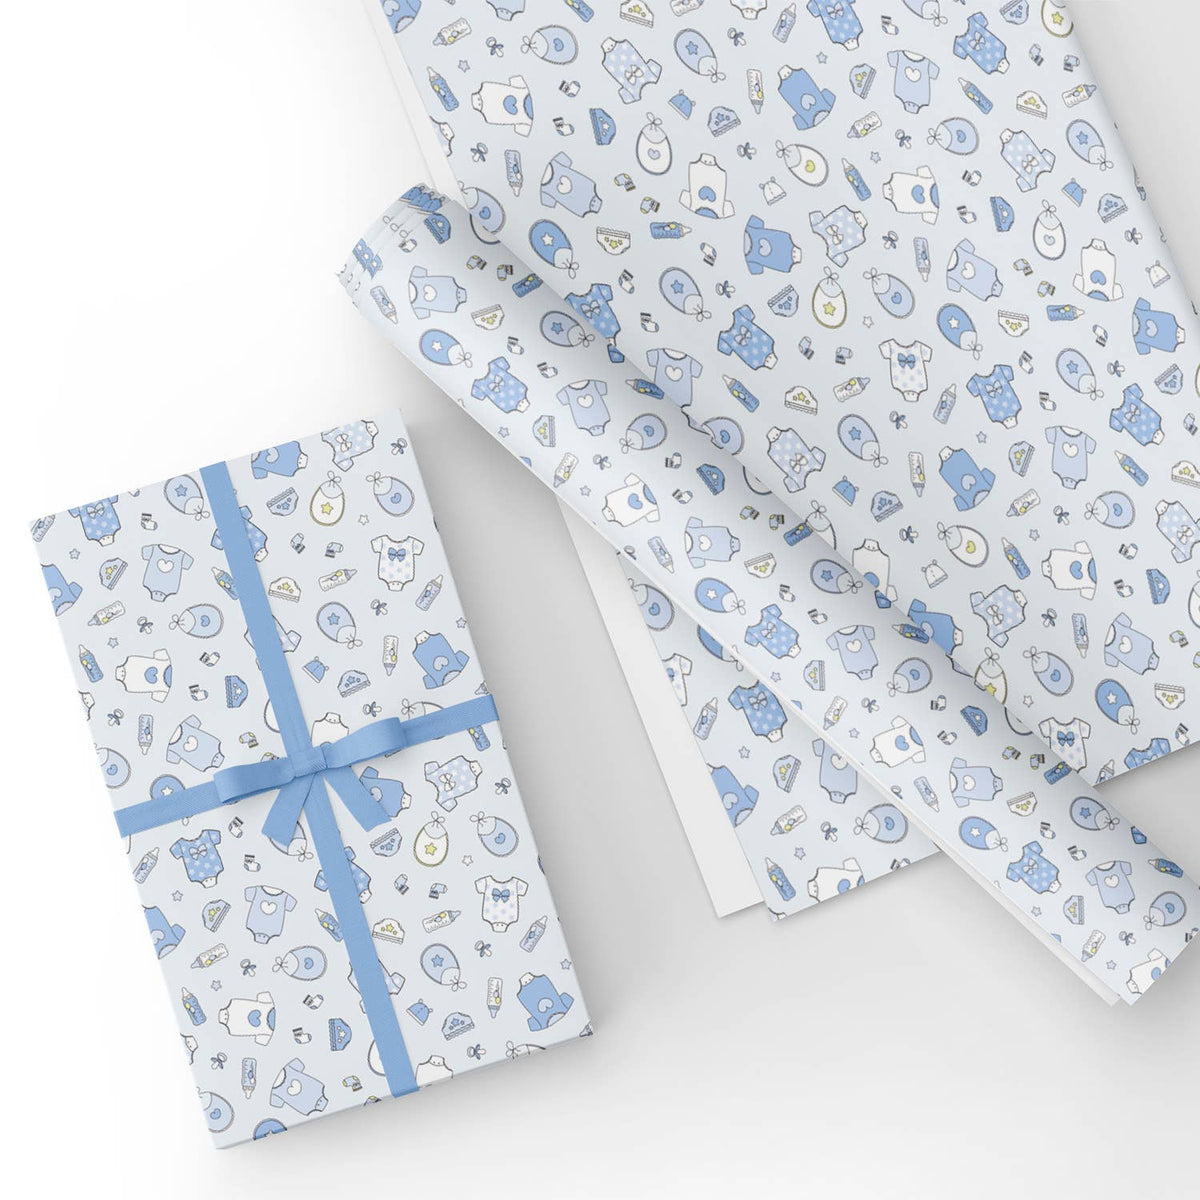 Baby Boy Gift Wrap, Baby Shower Gift Wrap, Baby Blue Gift Wrap, Wrapping  Paper Roll, Baby Boy Wrapping Paper, Gift Wrap for Baby Boy 